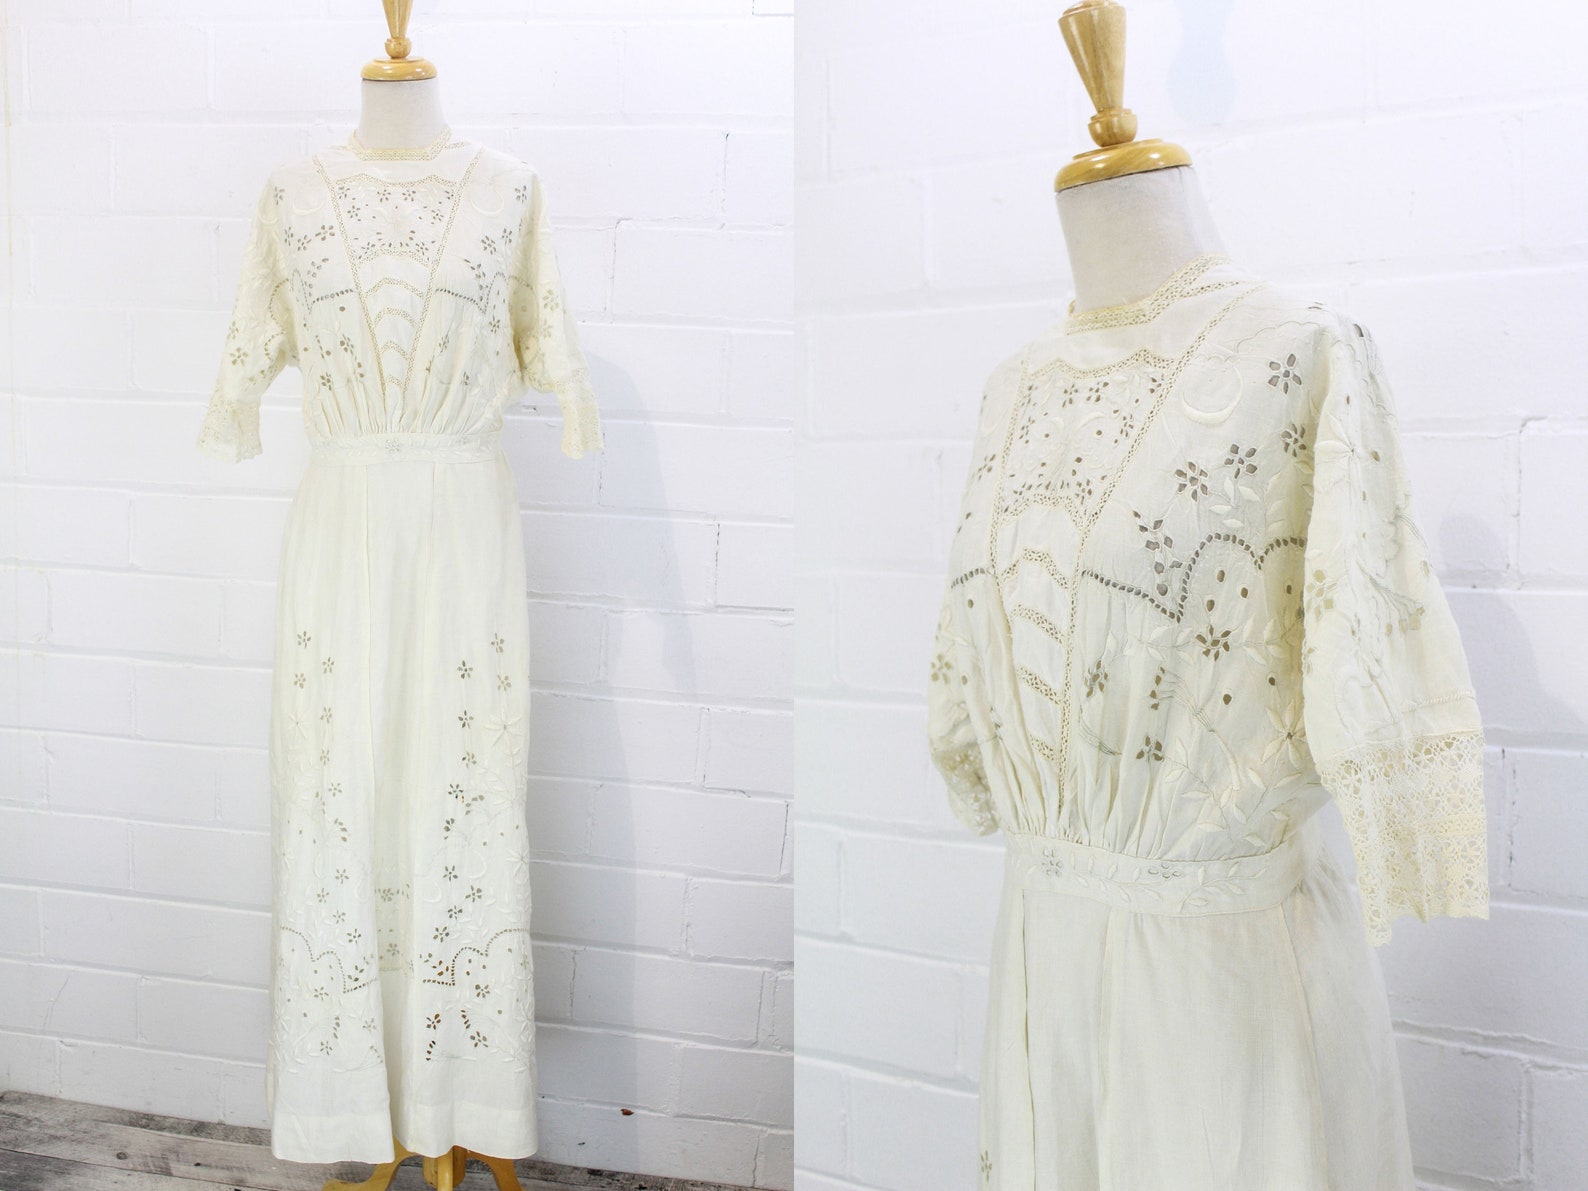 Antique 1900s White Cotton Gown with Embroidered Flowers, Eyelets, Dolman Sleeves, Button Up Back